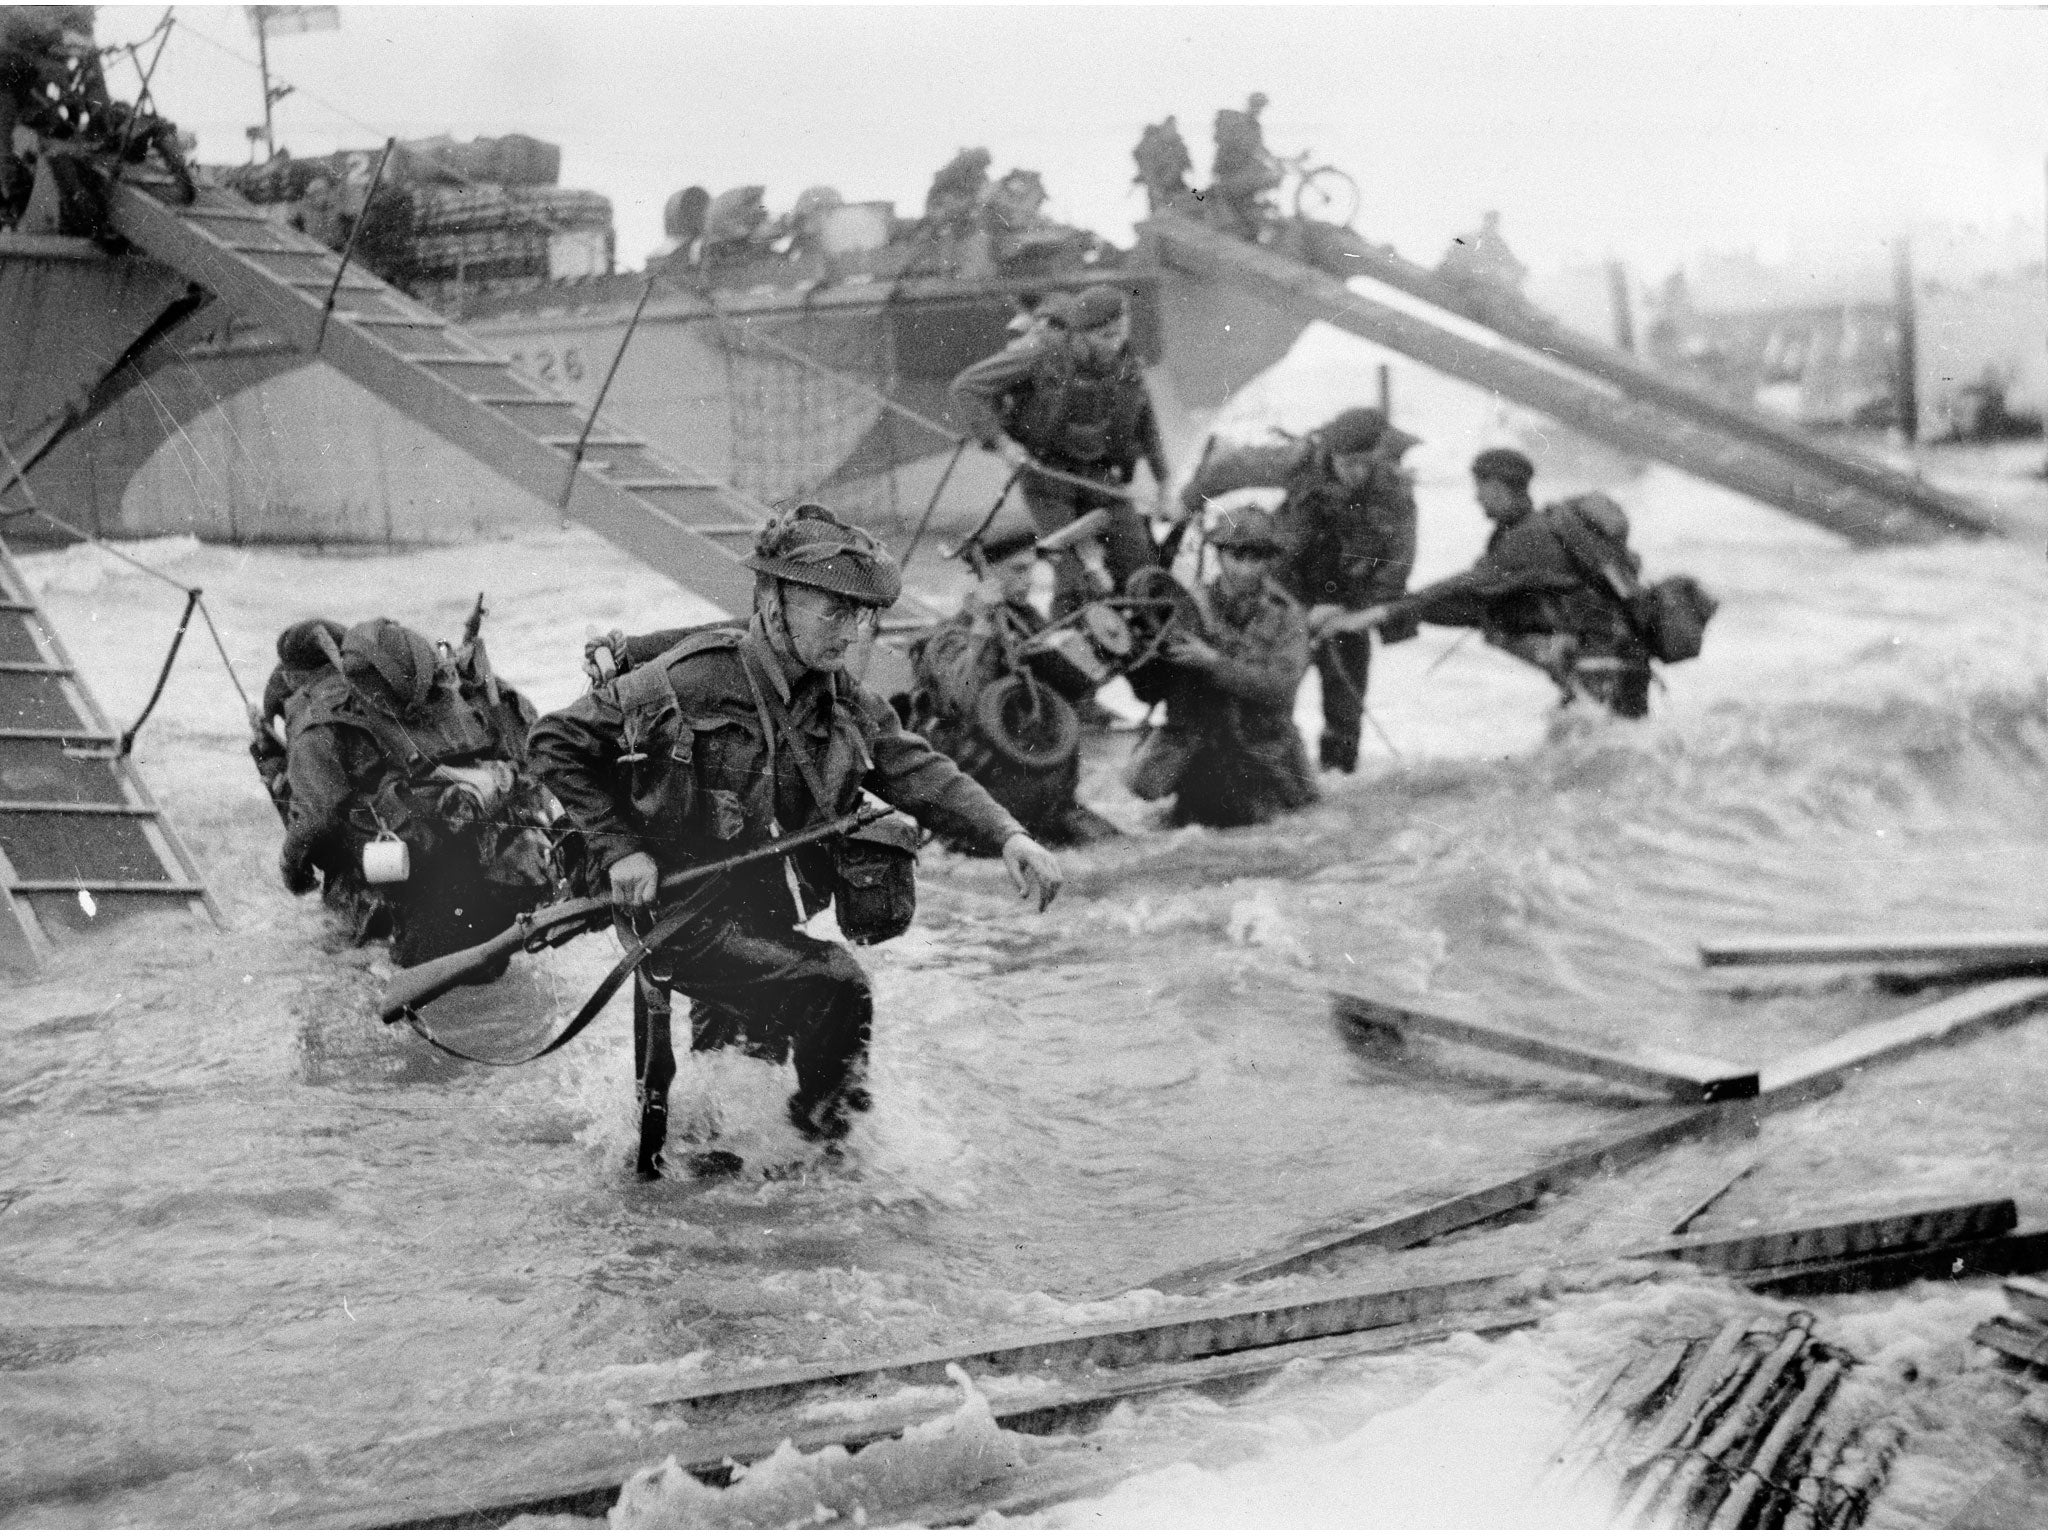 D-Day: Normandy, 6 June 1944